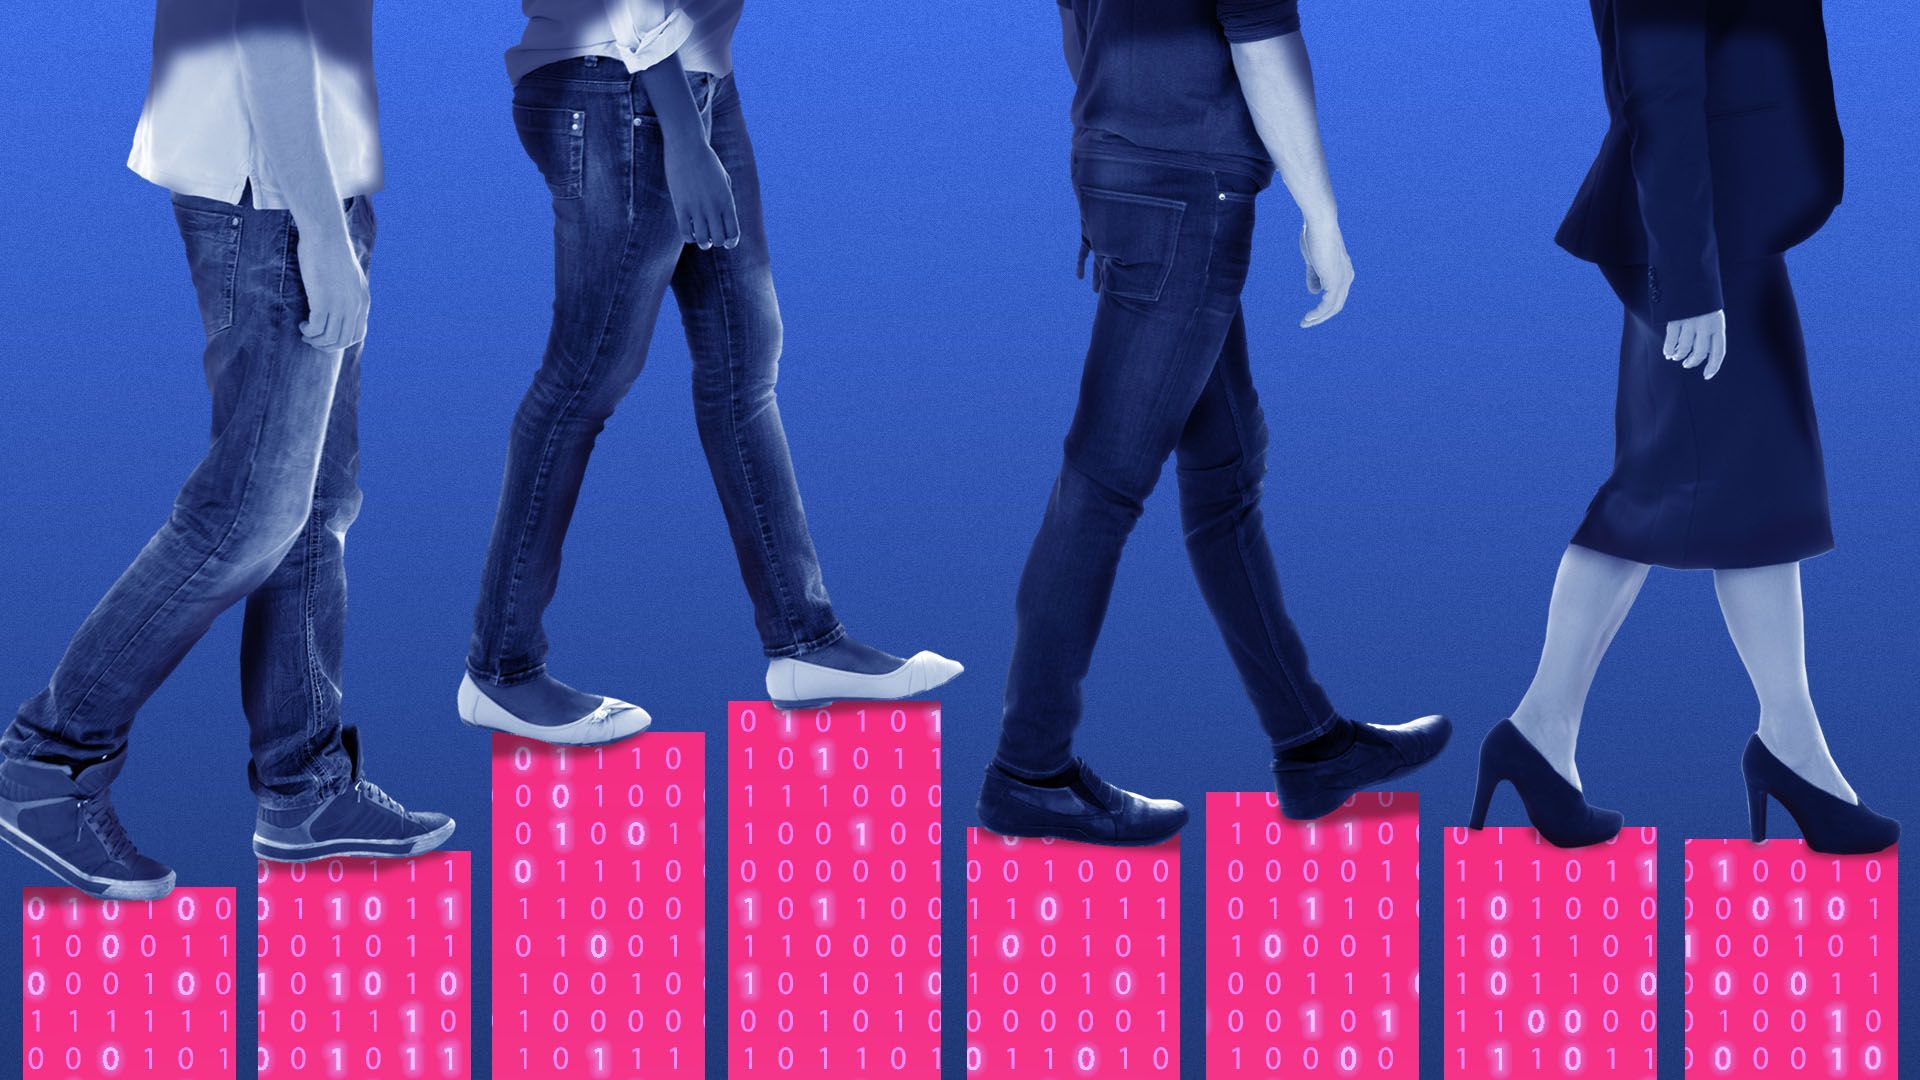 Image of four people's legs walking atop a pink bar graph with binary numerals